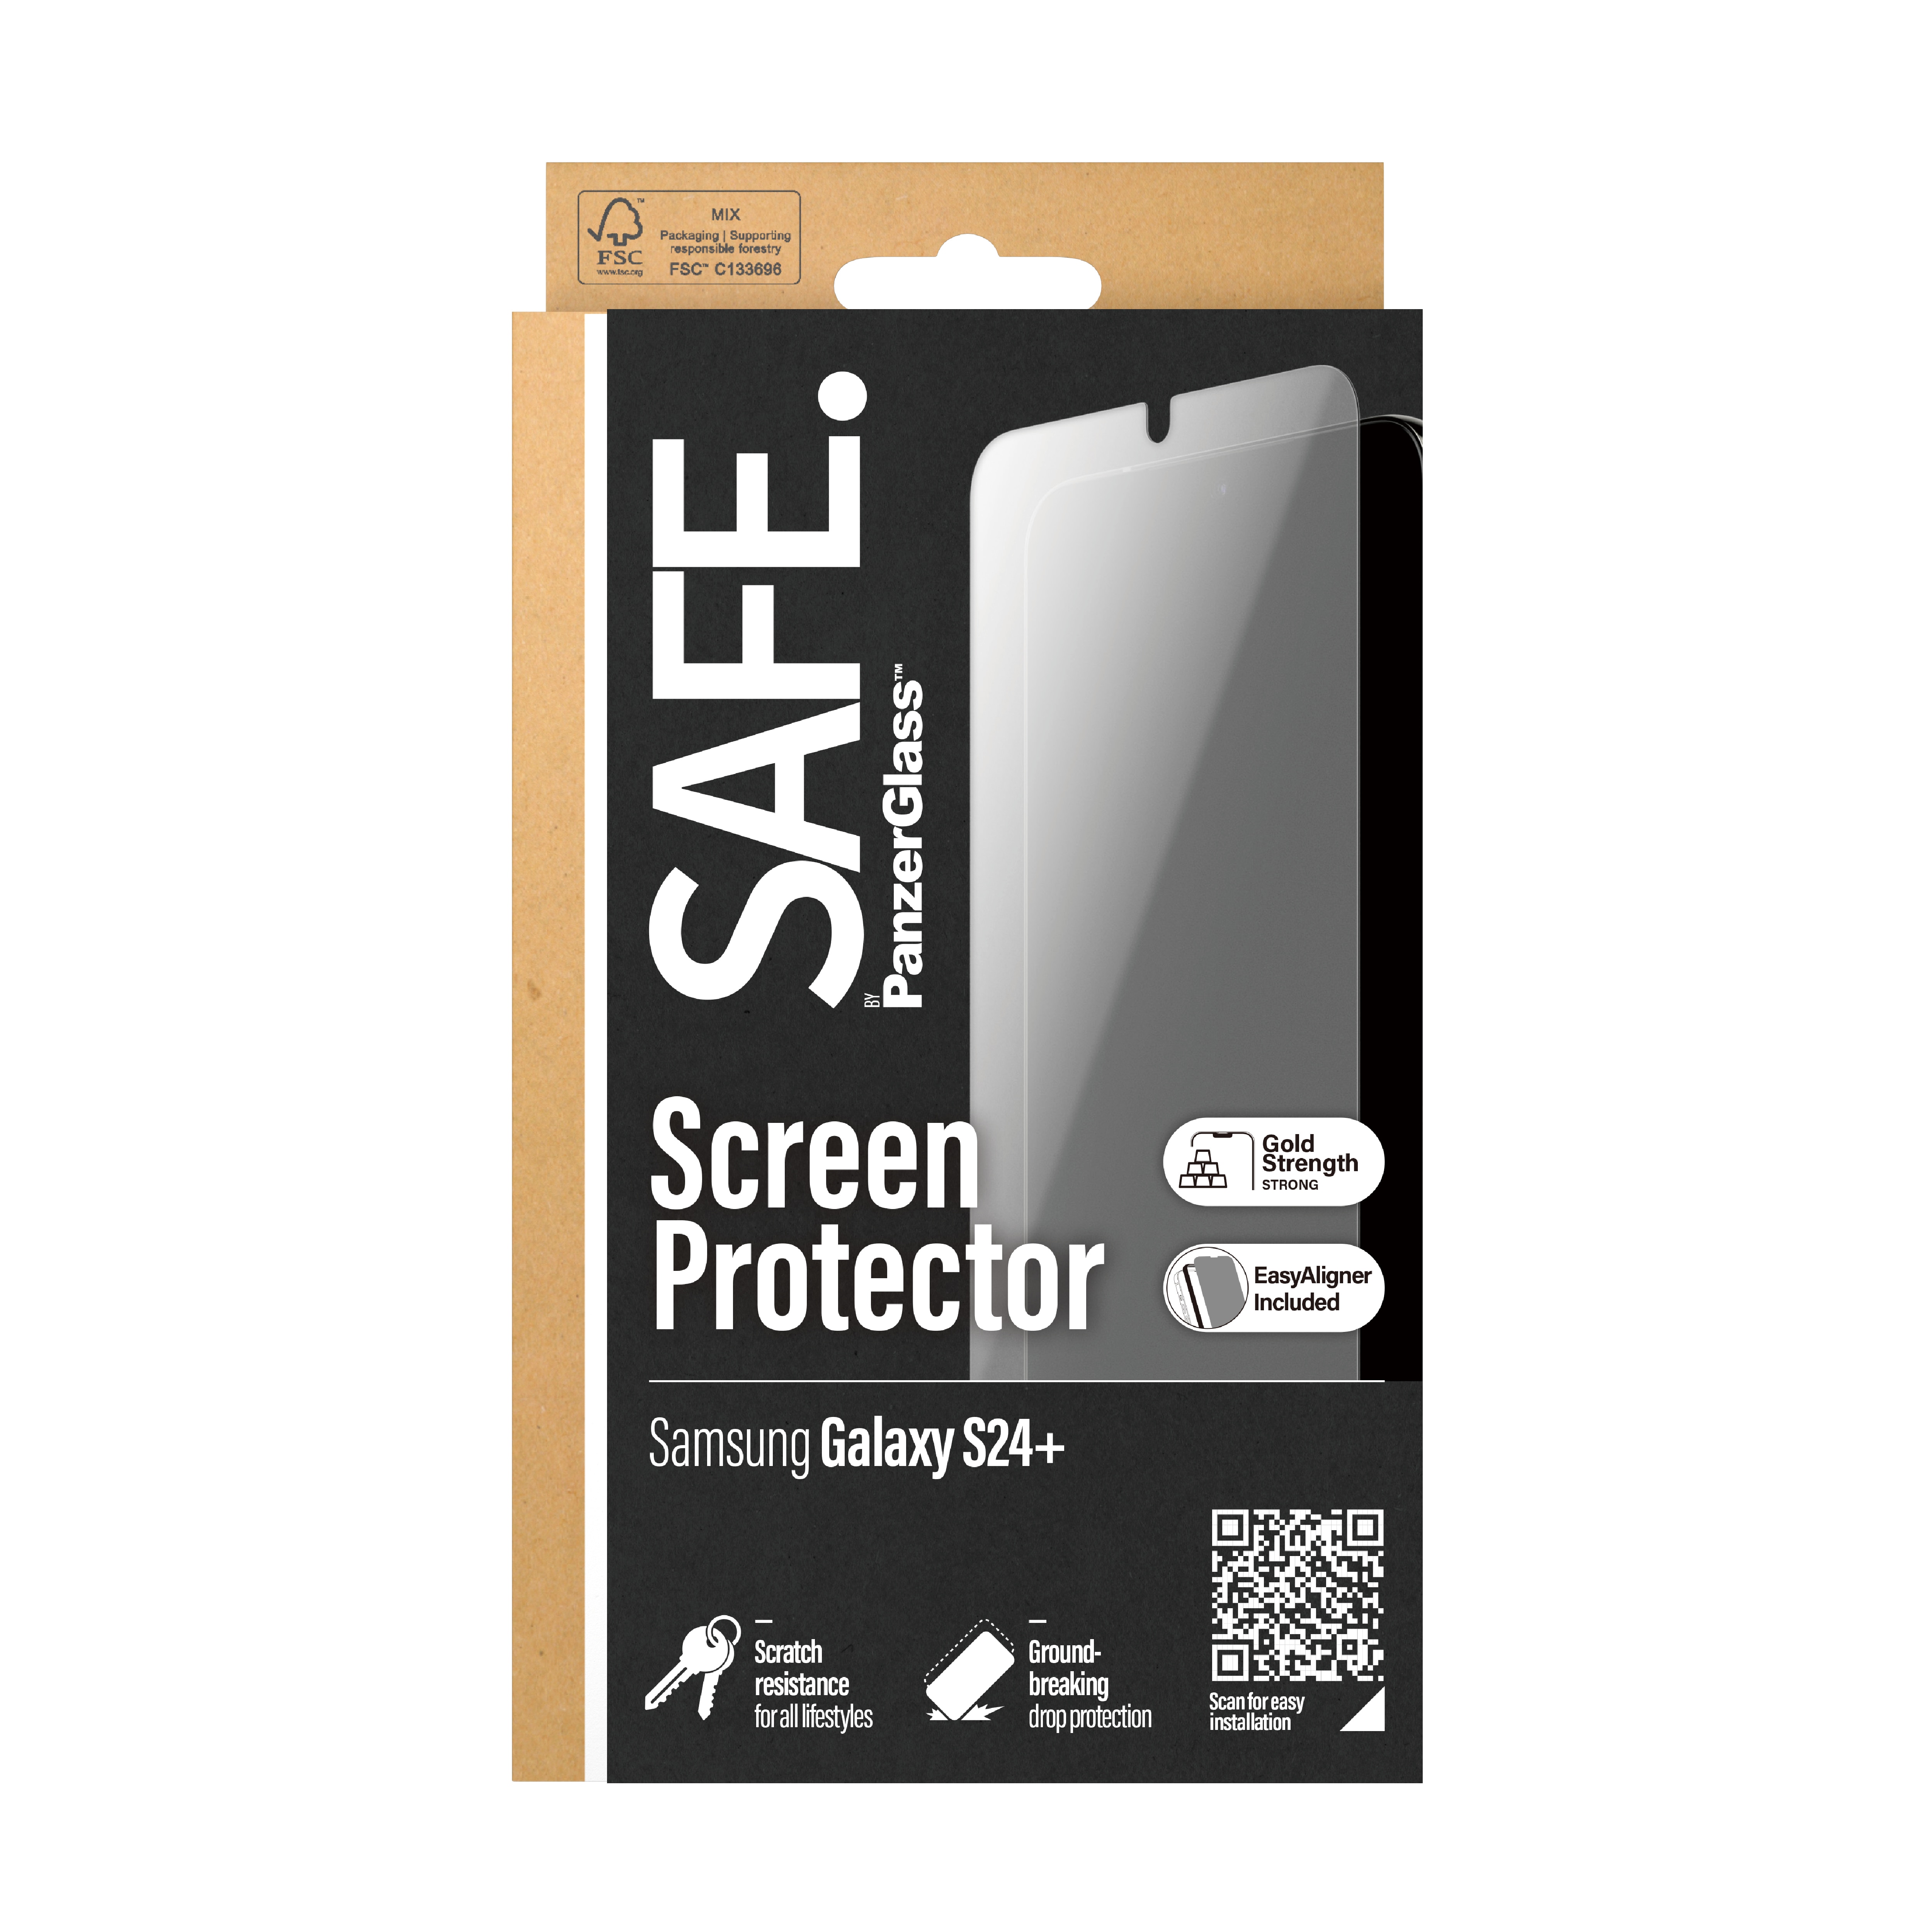 Samsung Galaxy S24 Plus Screen Protector Ultra Wide Fit (with EasyAligner)